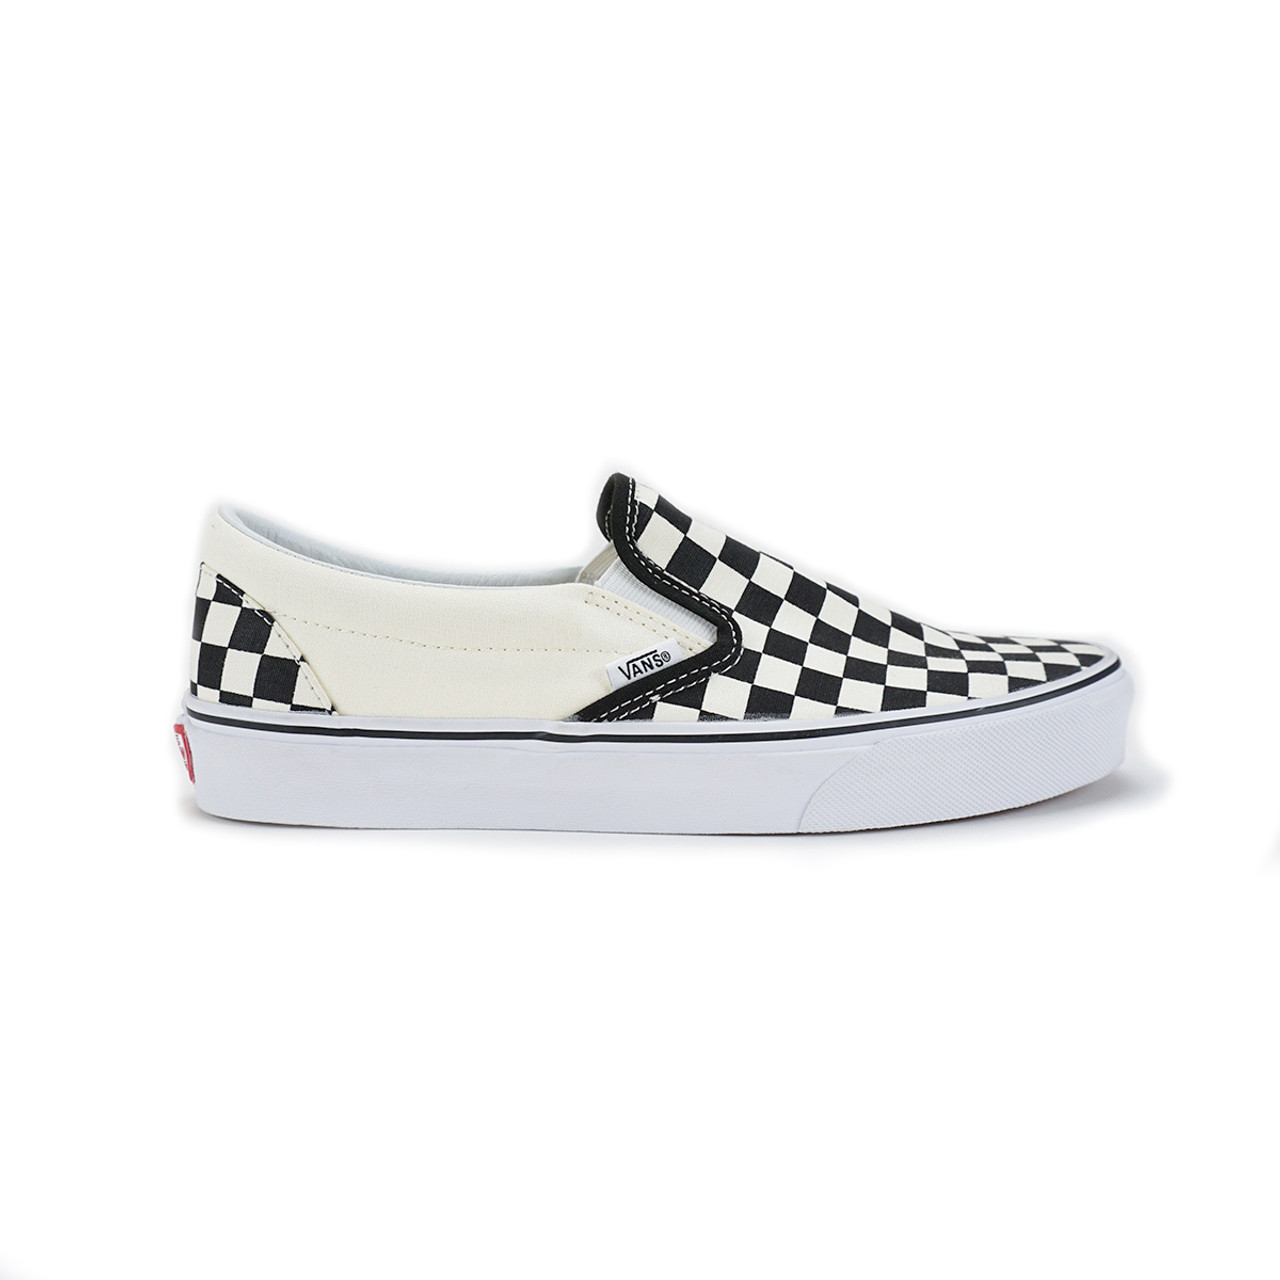 black and white checkered sneakers